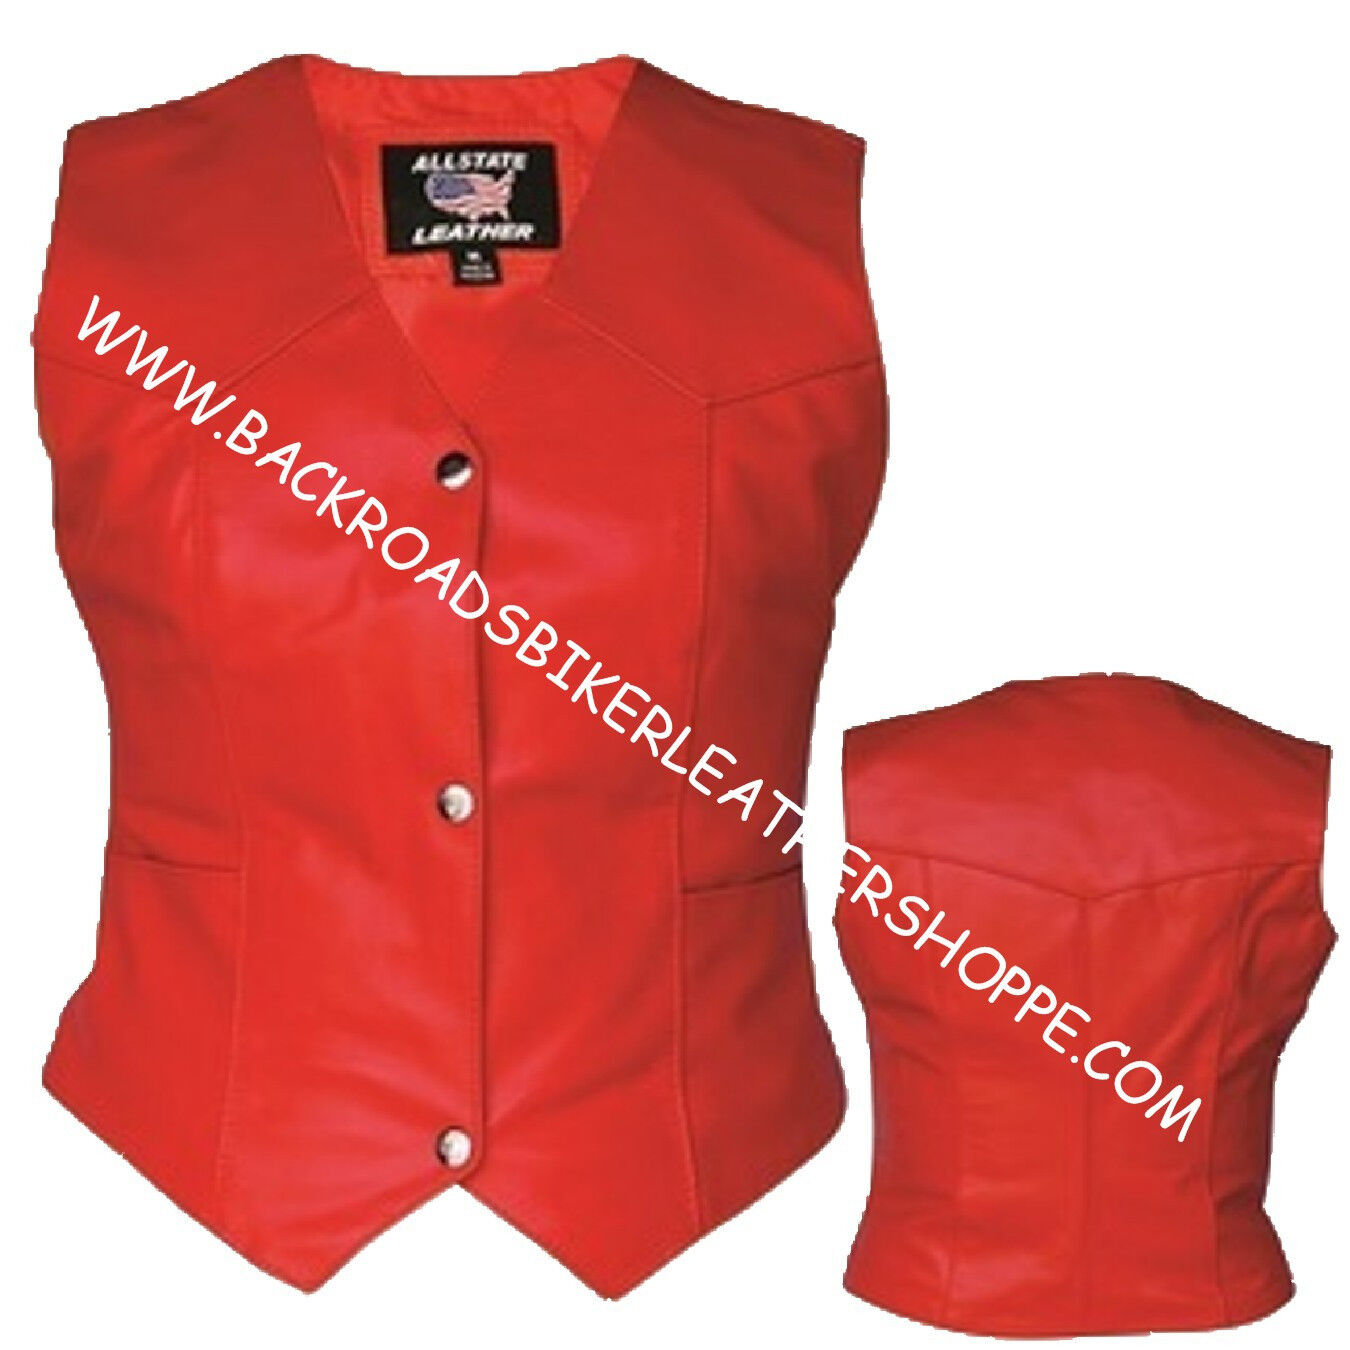 Ladies Women's Red Leather Vest Motorcycle Biker - Sizes XS to 5X NWT ...